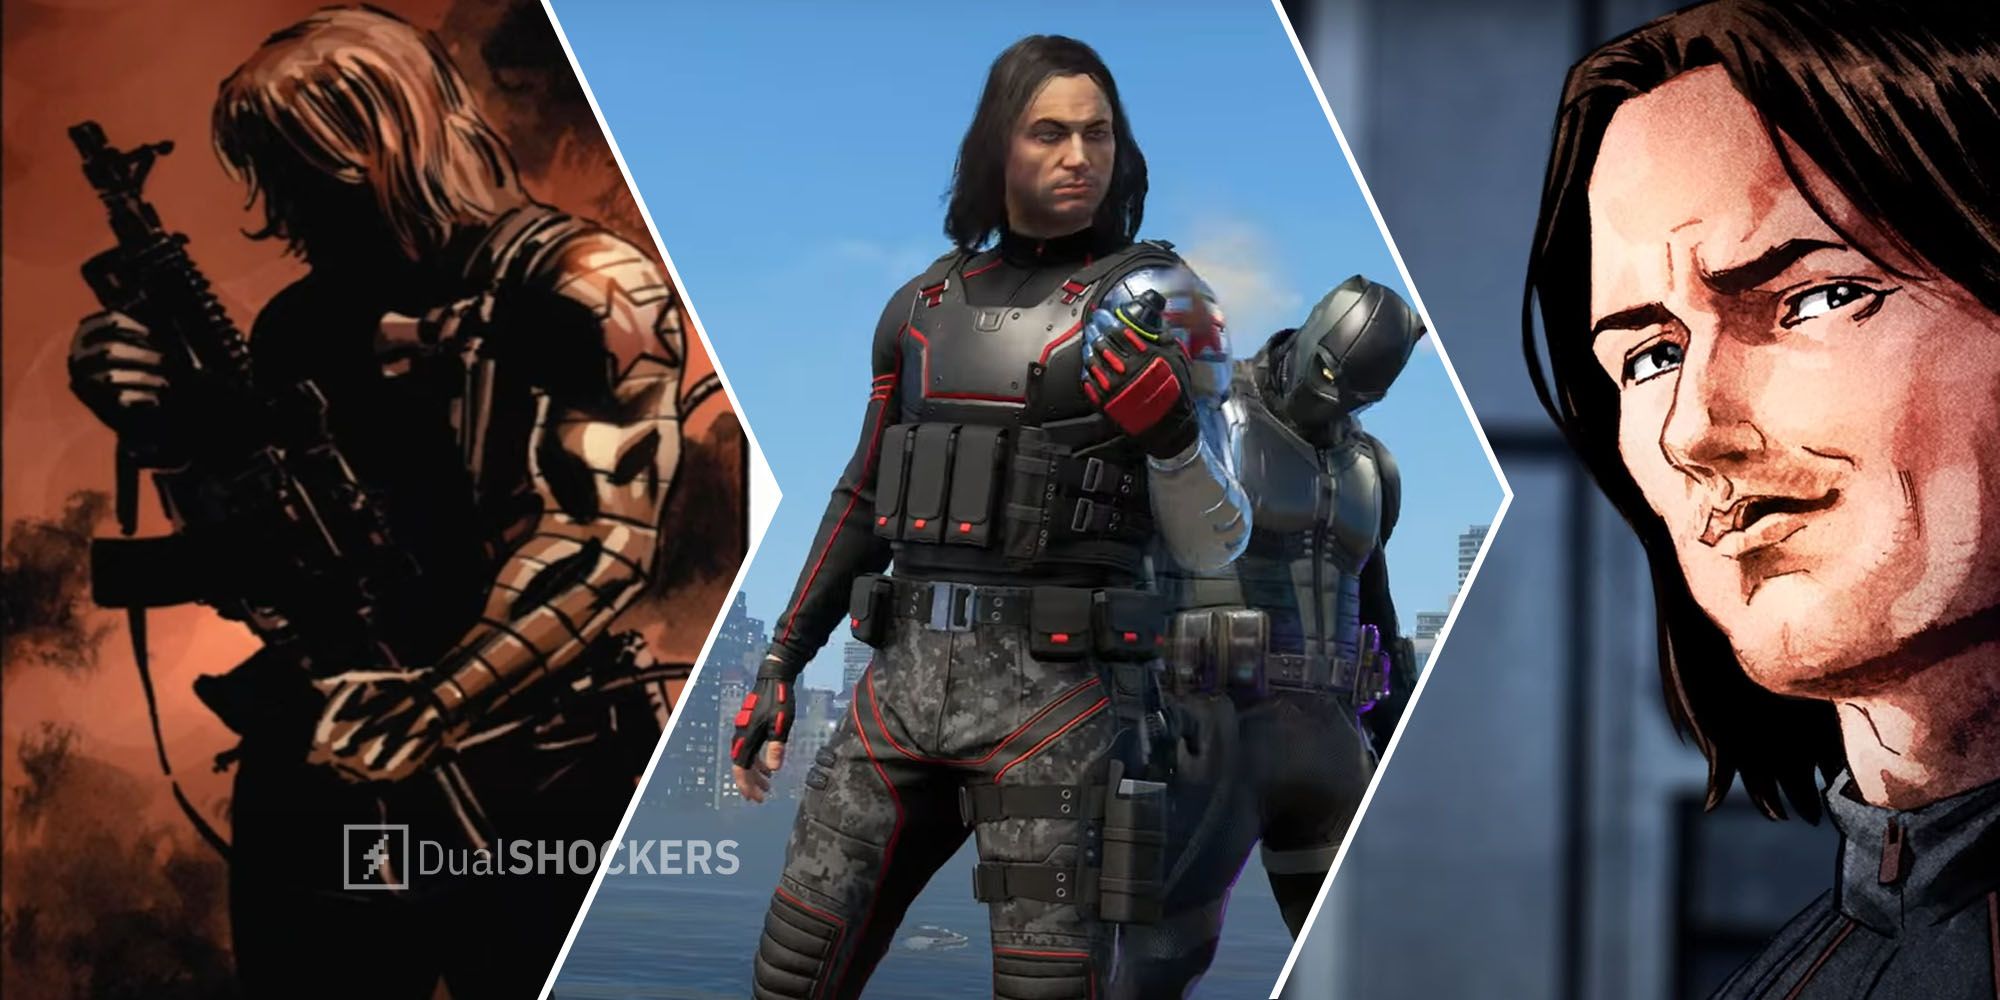 Marvel's Avengers The Winter Soldier is holding a rifle and a grenade